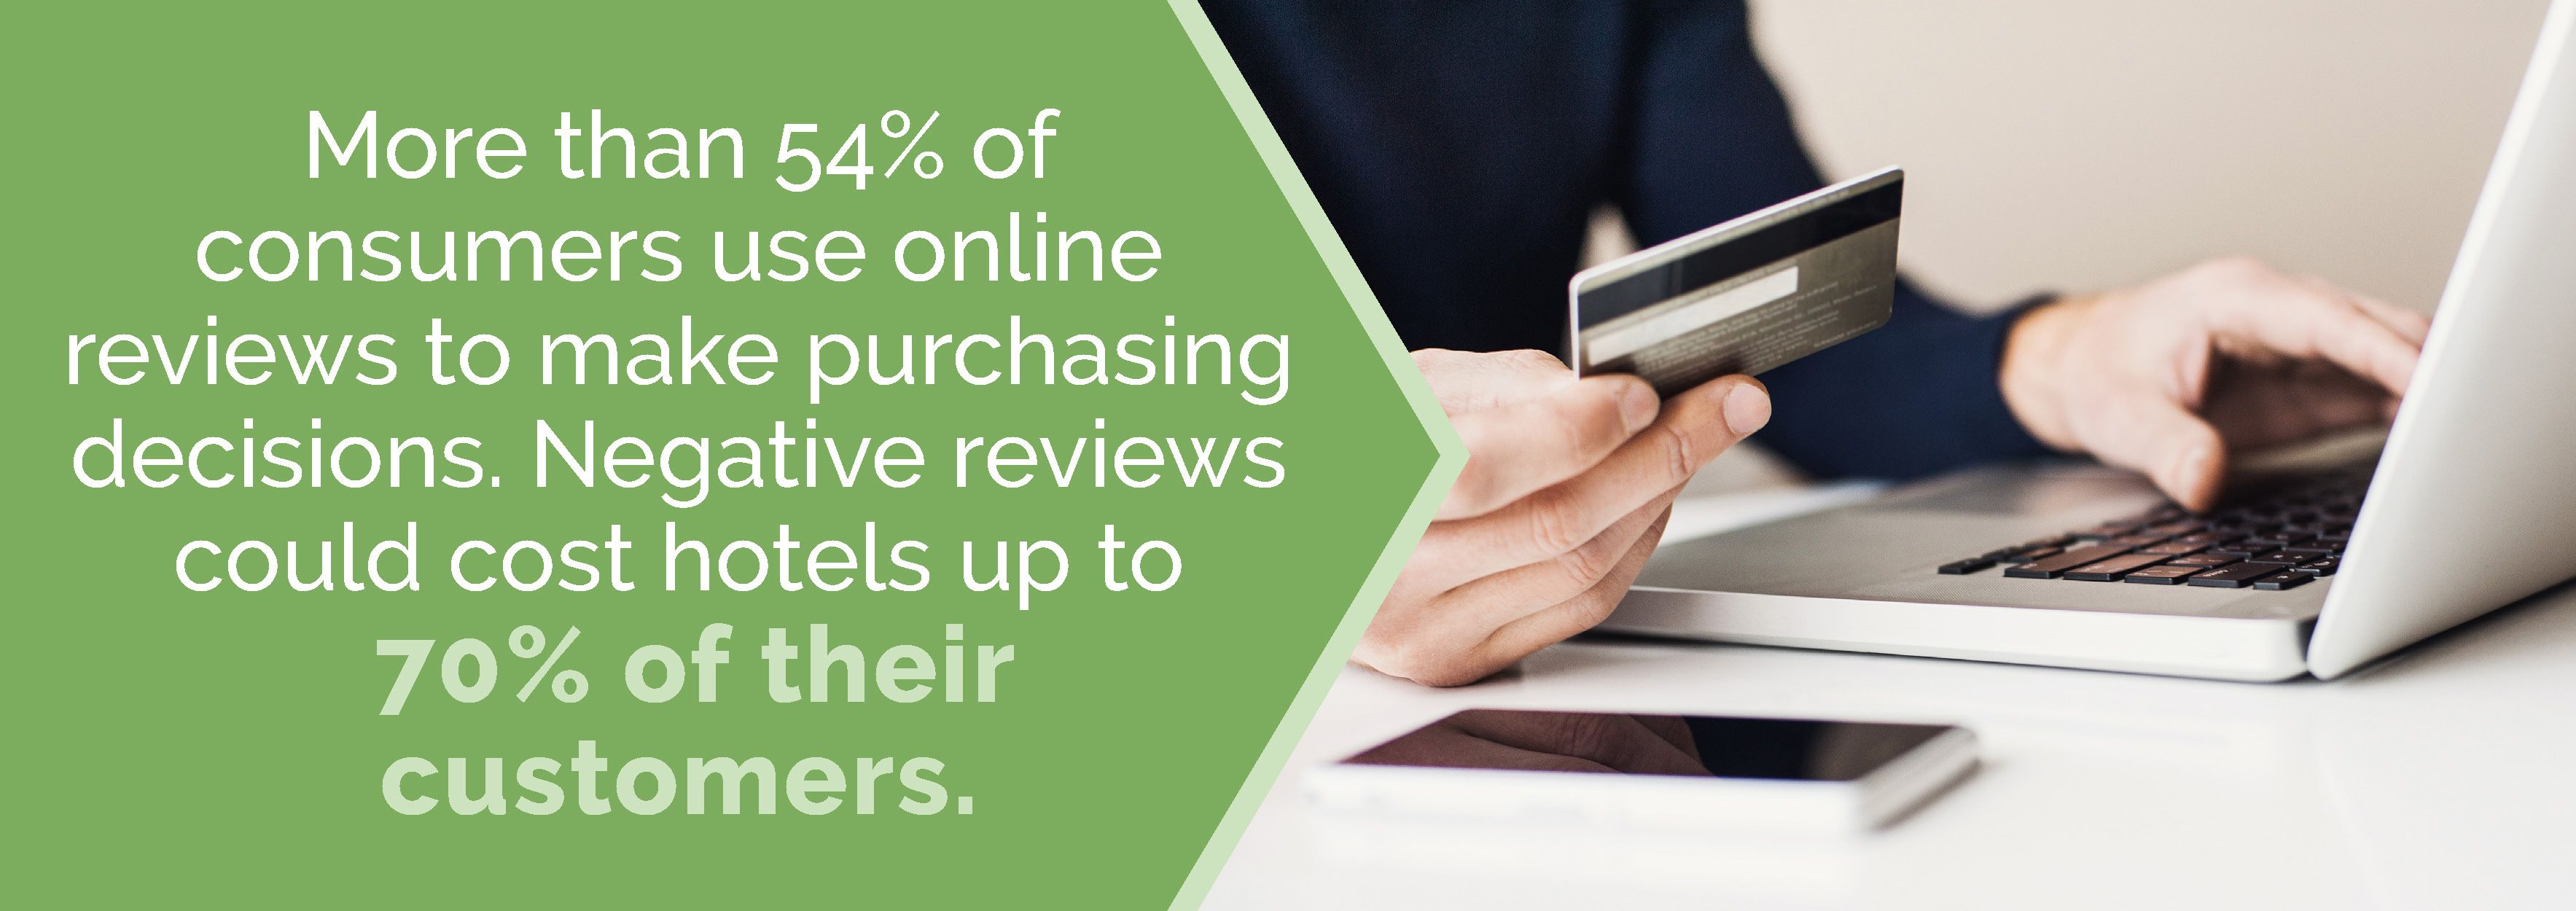 54% of consumers use online reviews to make purchasing decisions.